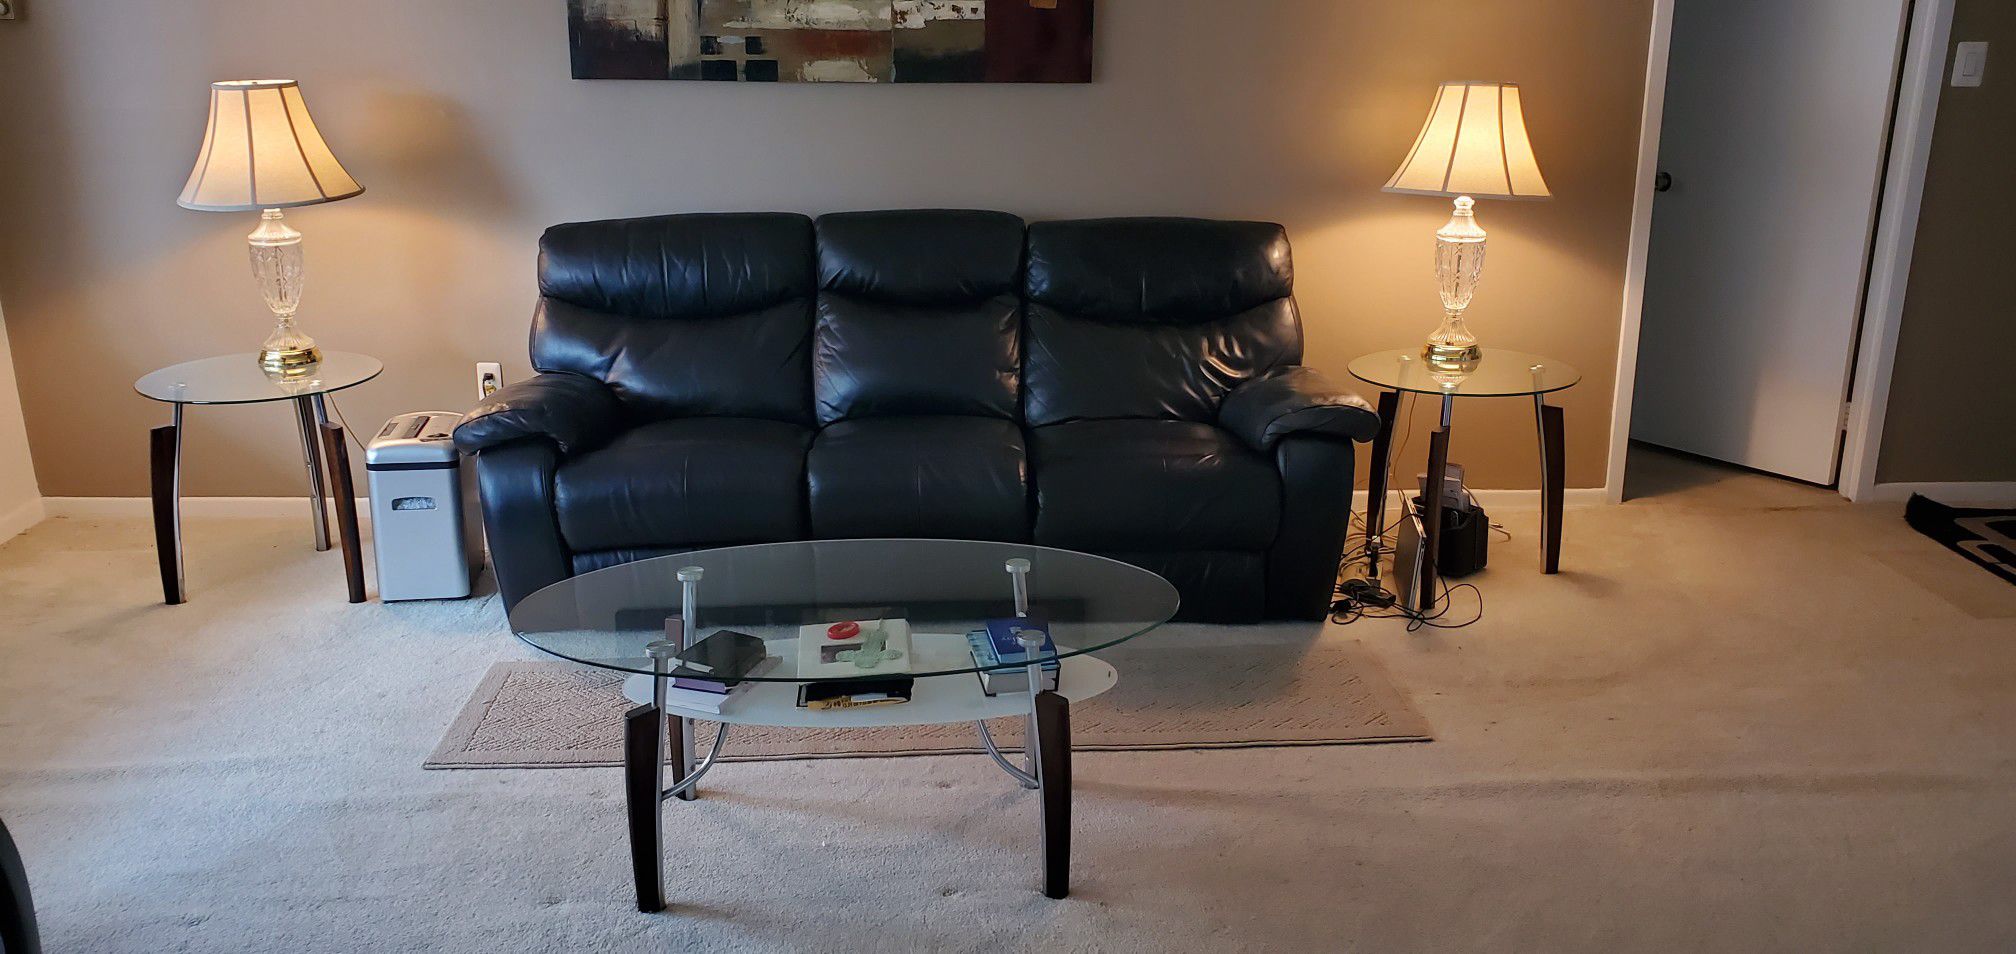 Italian Leather Recliner Sofa, Chair and Coffee Table Set